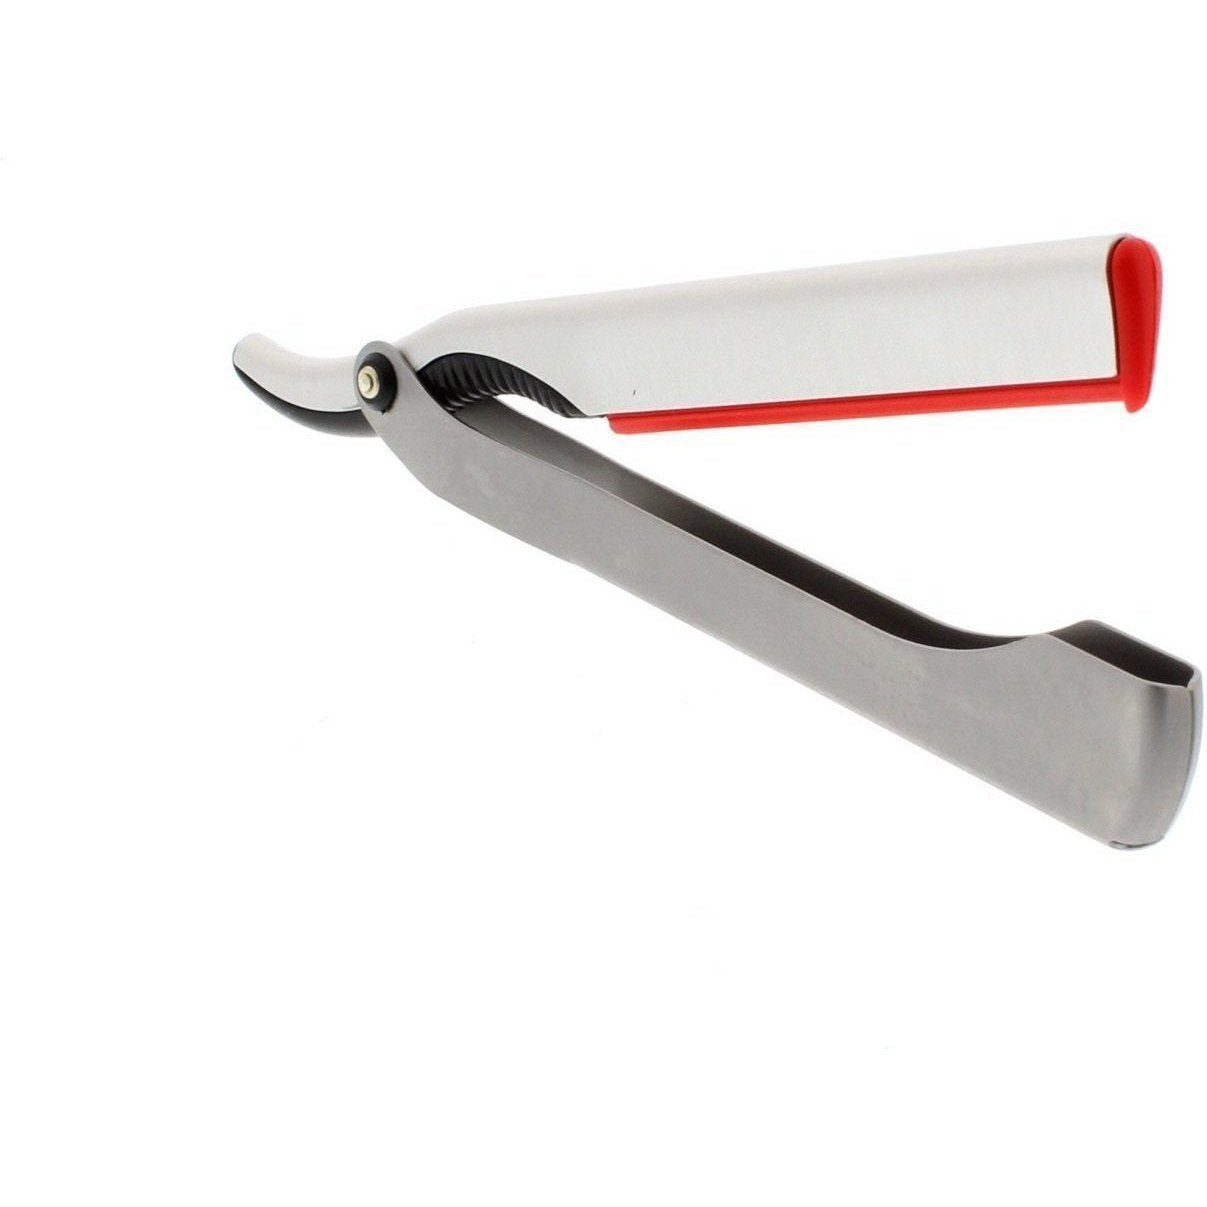 Product image 2 for Dovo Shavette Straight Razor, Stainless Steel Handle